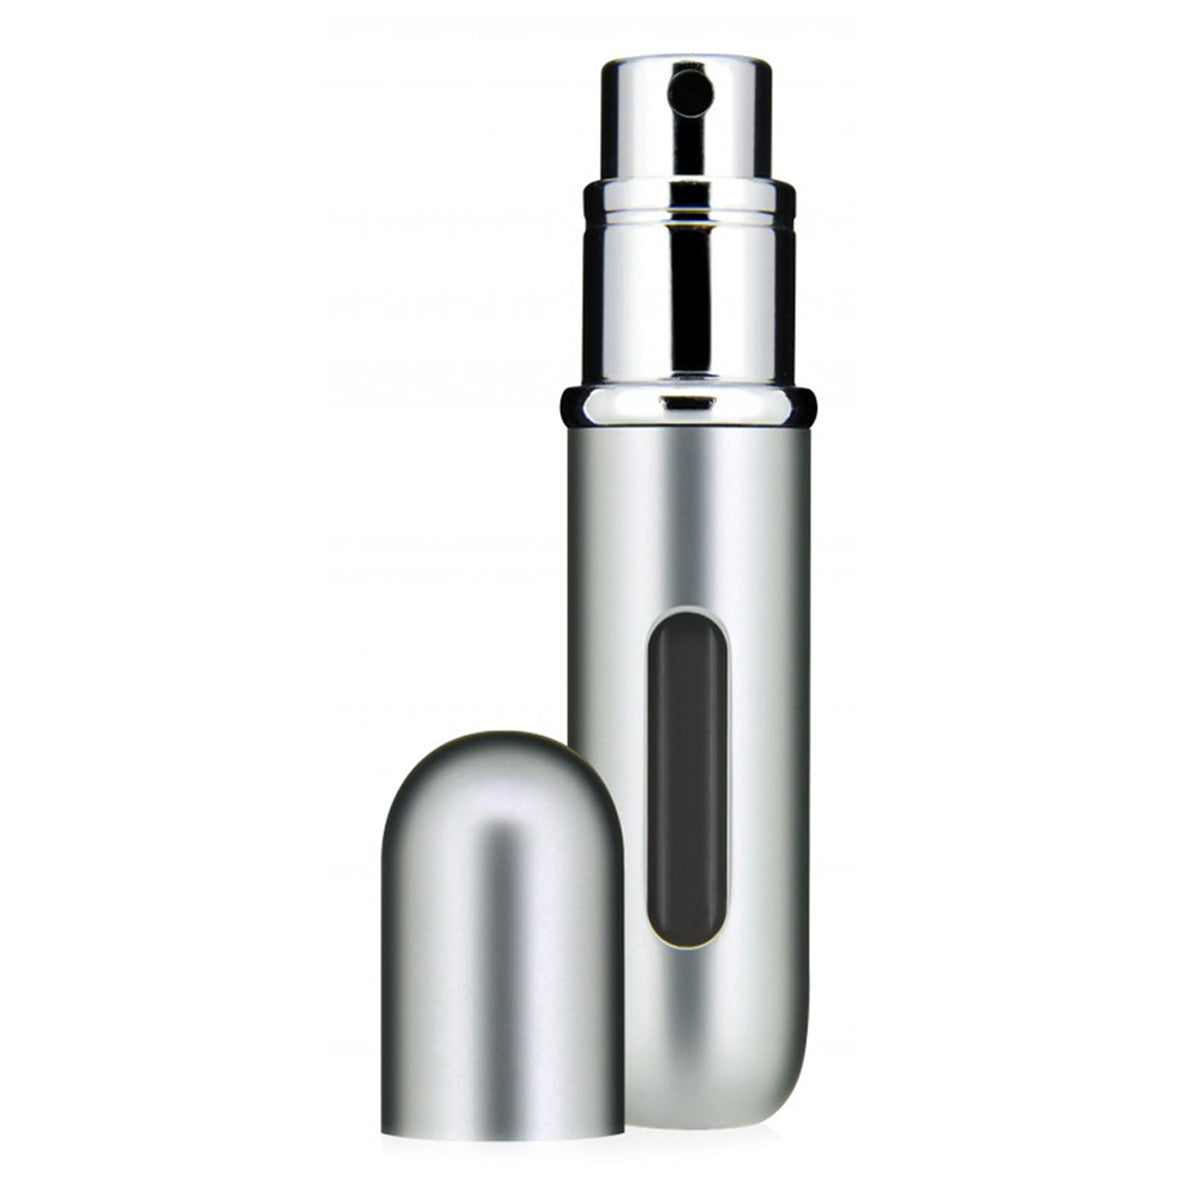 Primary image of Silver Atomizer